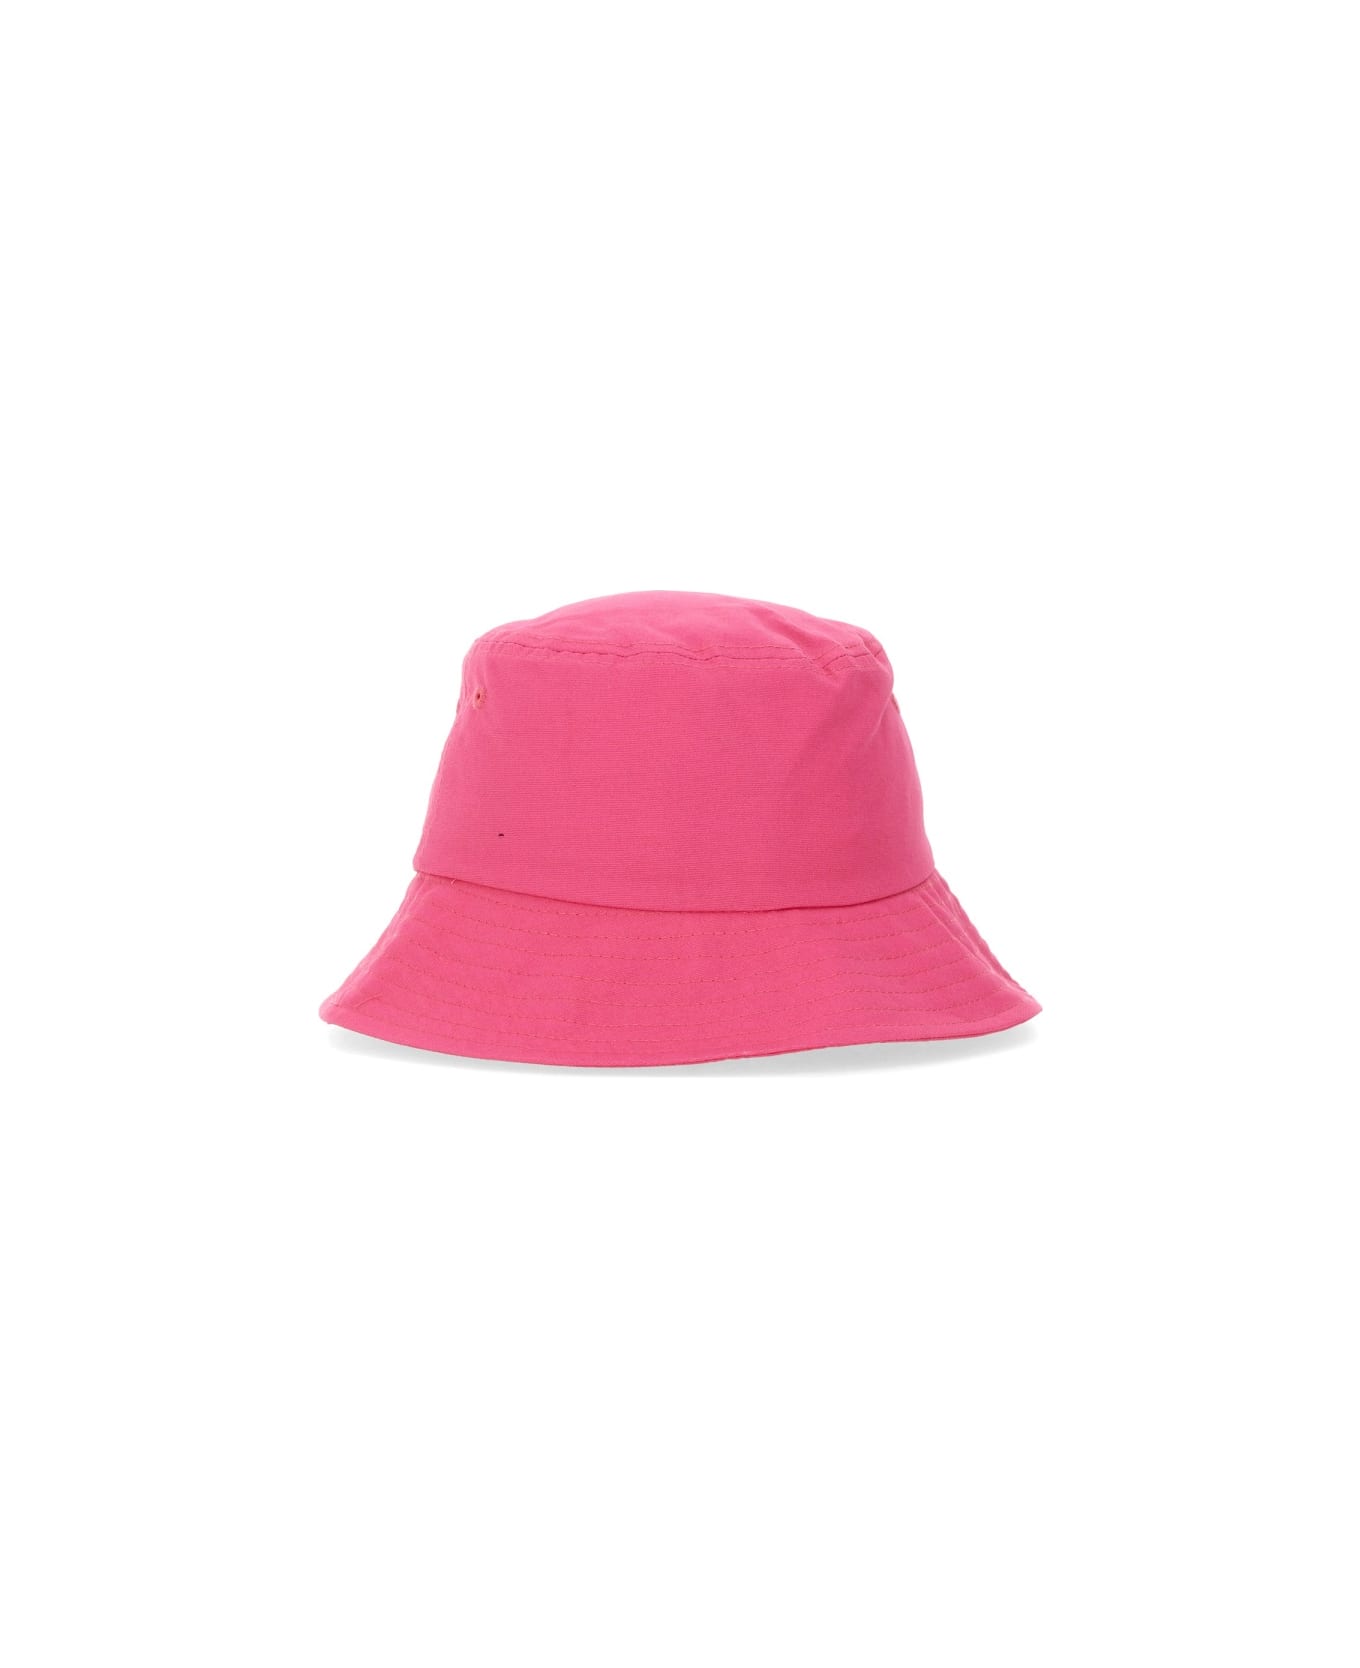 Versace Jeans Couture Bucket Hat - FUCHSIA 帽子